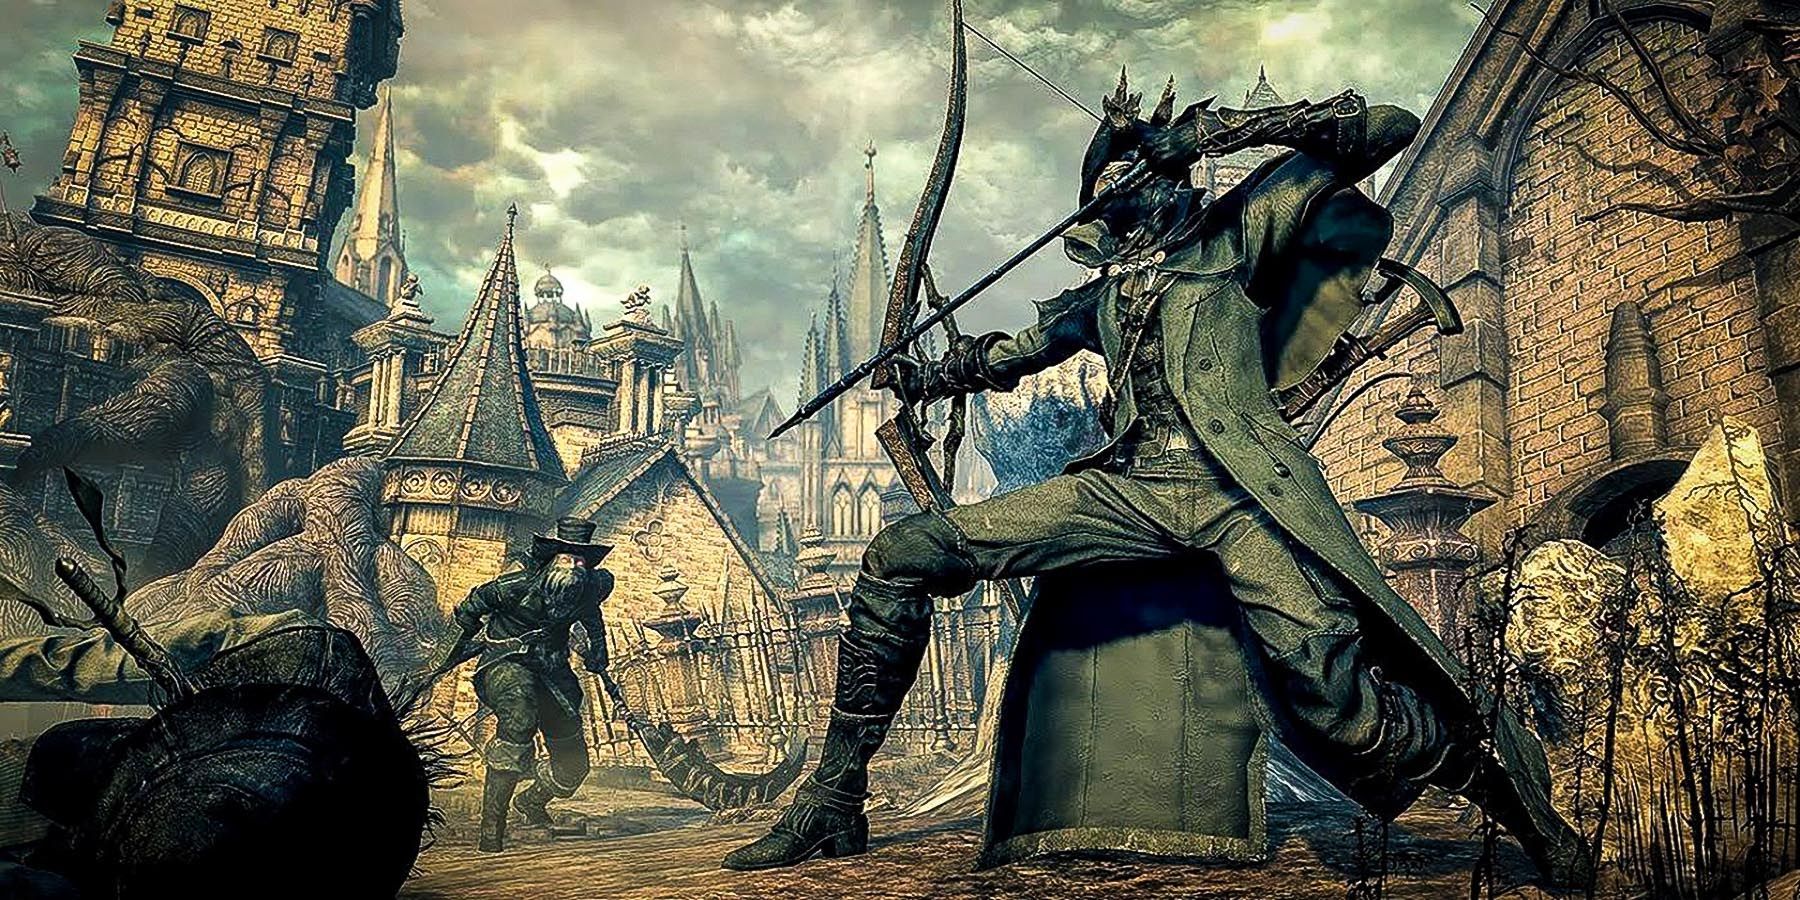 The Hunter aims a bow and arrow in Bloodborne